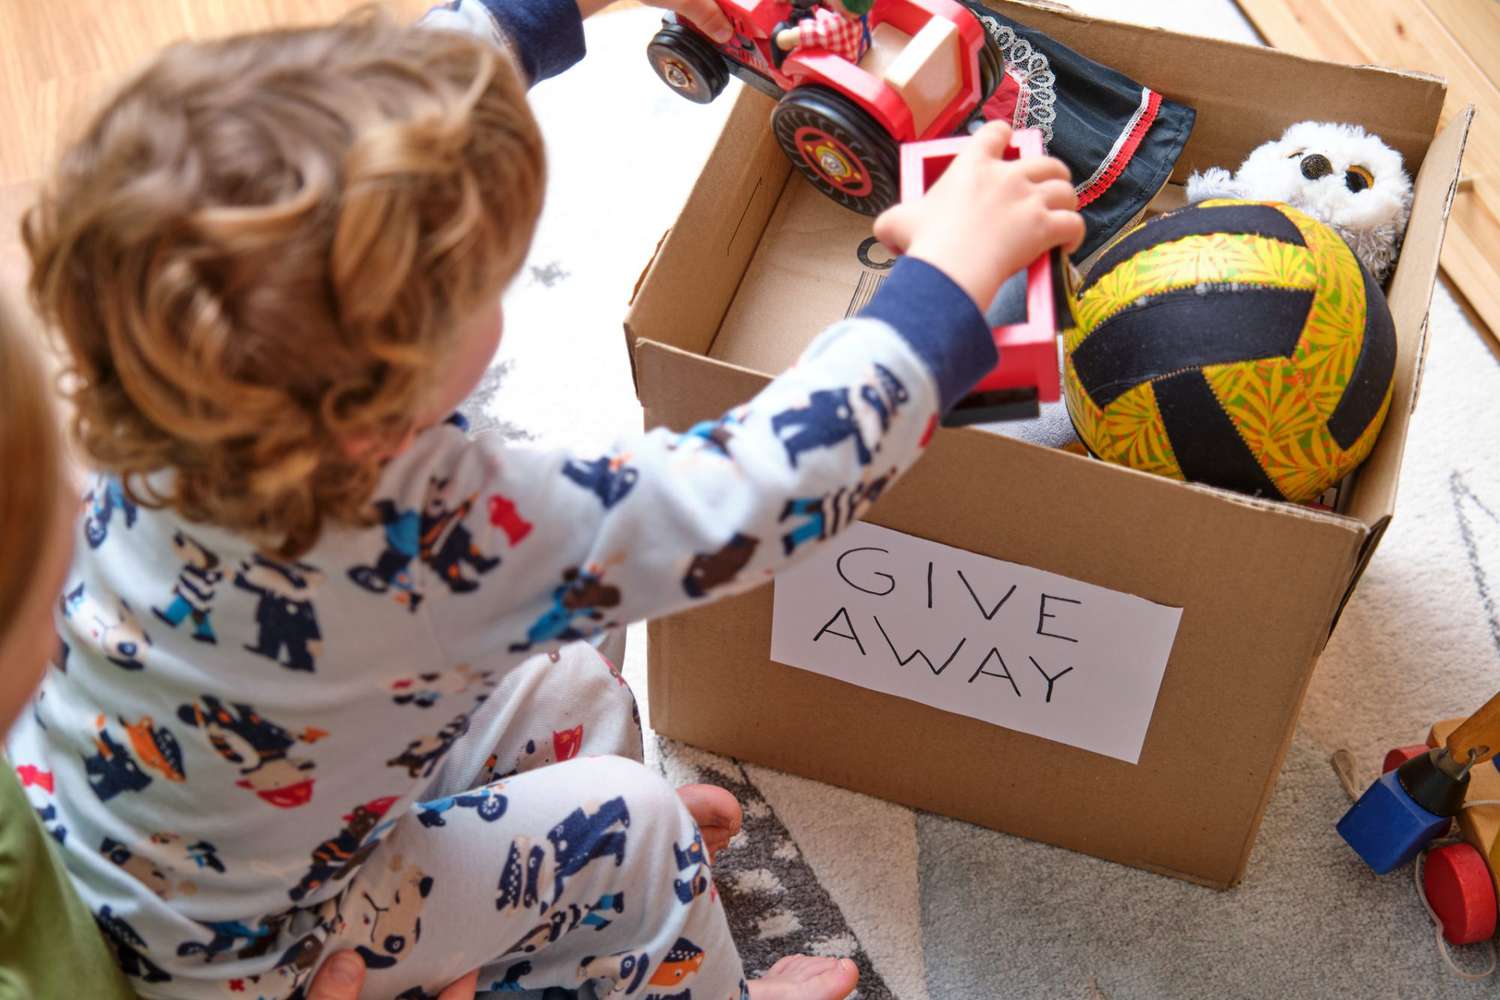 An image of a boy putting toys into a box for donation.